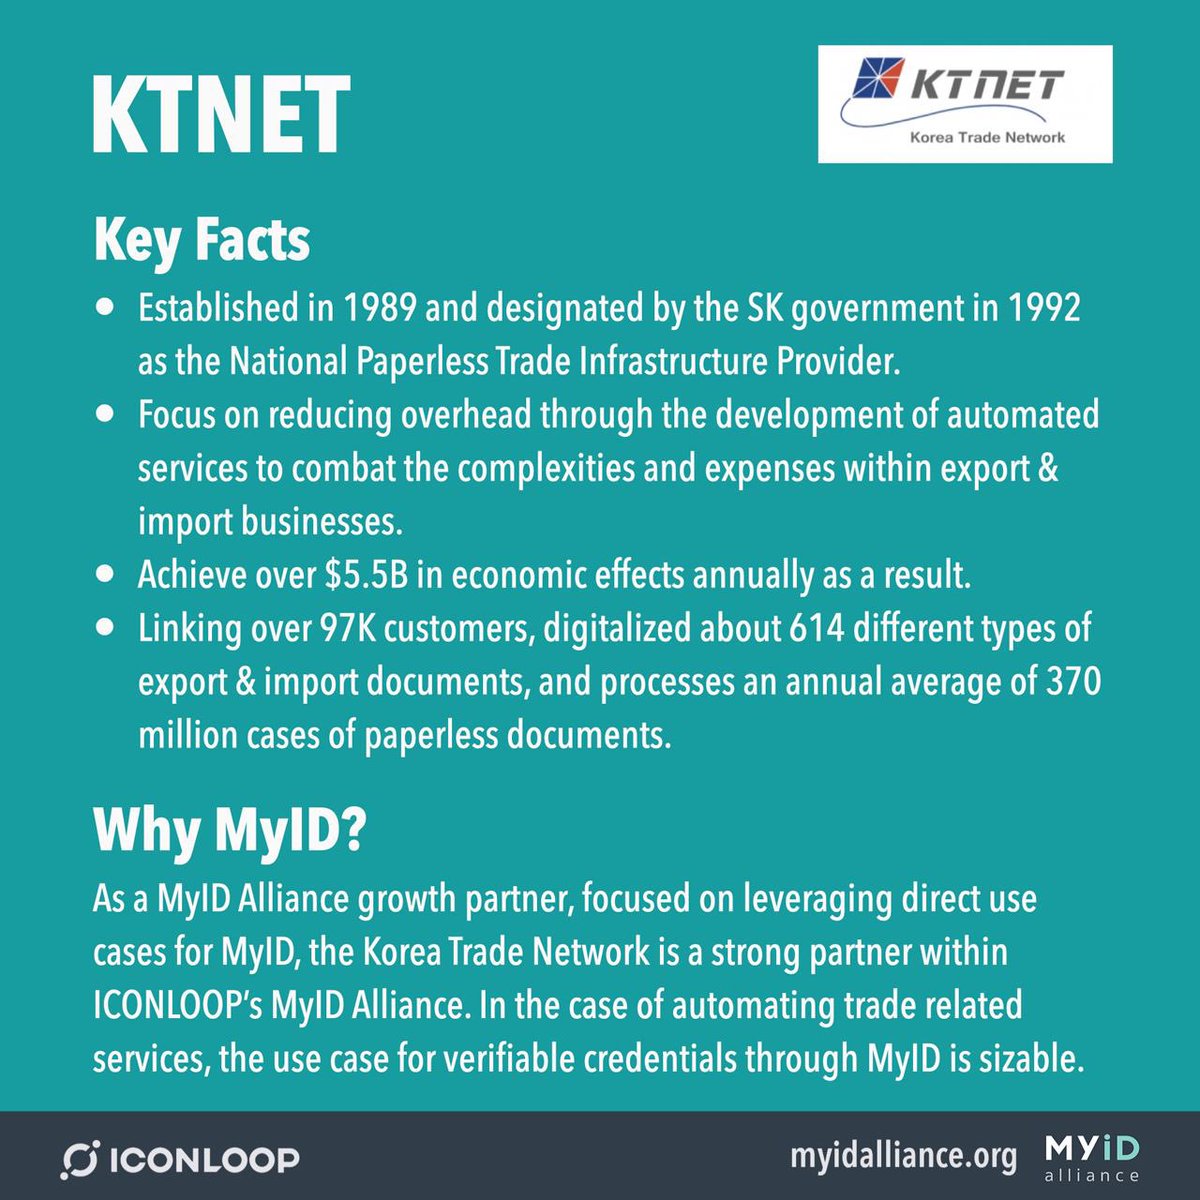 KTNET - Korea Trade Network. Designated by the SK government in 1992 as the National Paperless Trade Infrastructure Provider. A MyID Alliance growth partner.  #Crypto  #Blockchain  #ICONProject  #ICON  $ICX